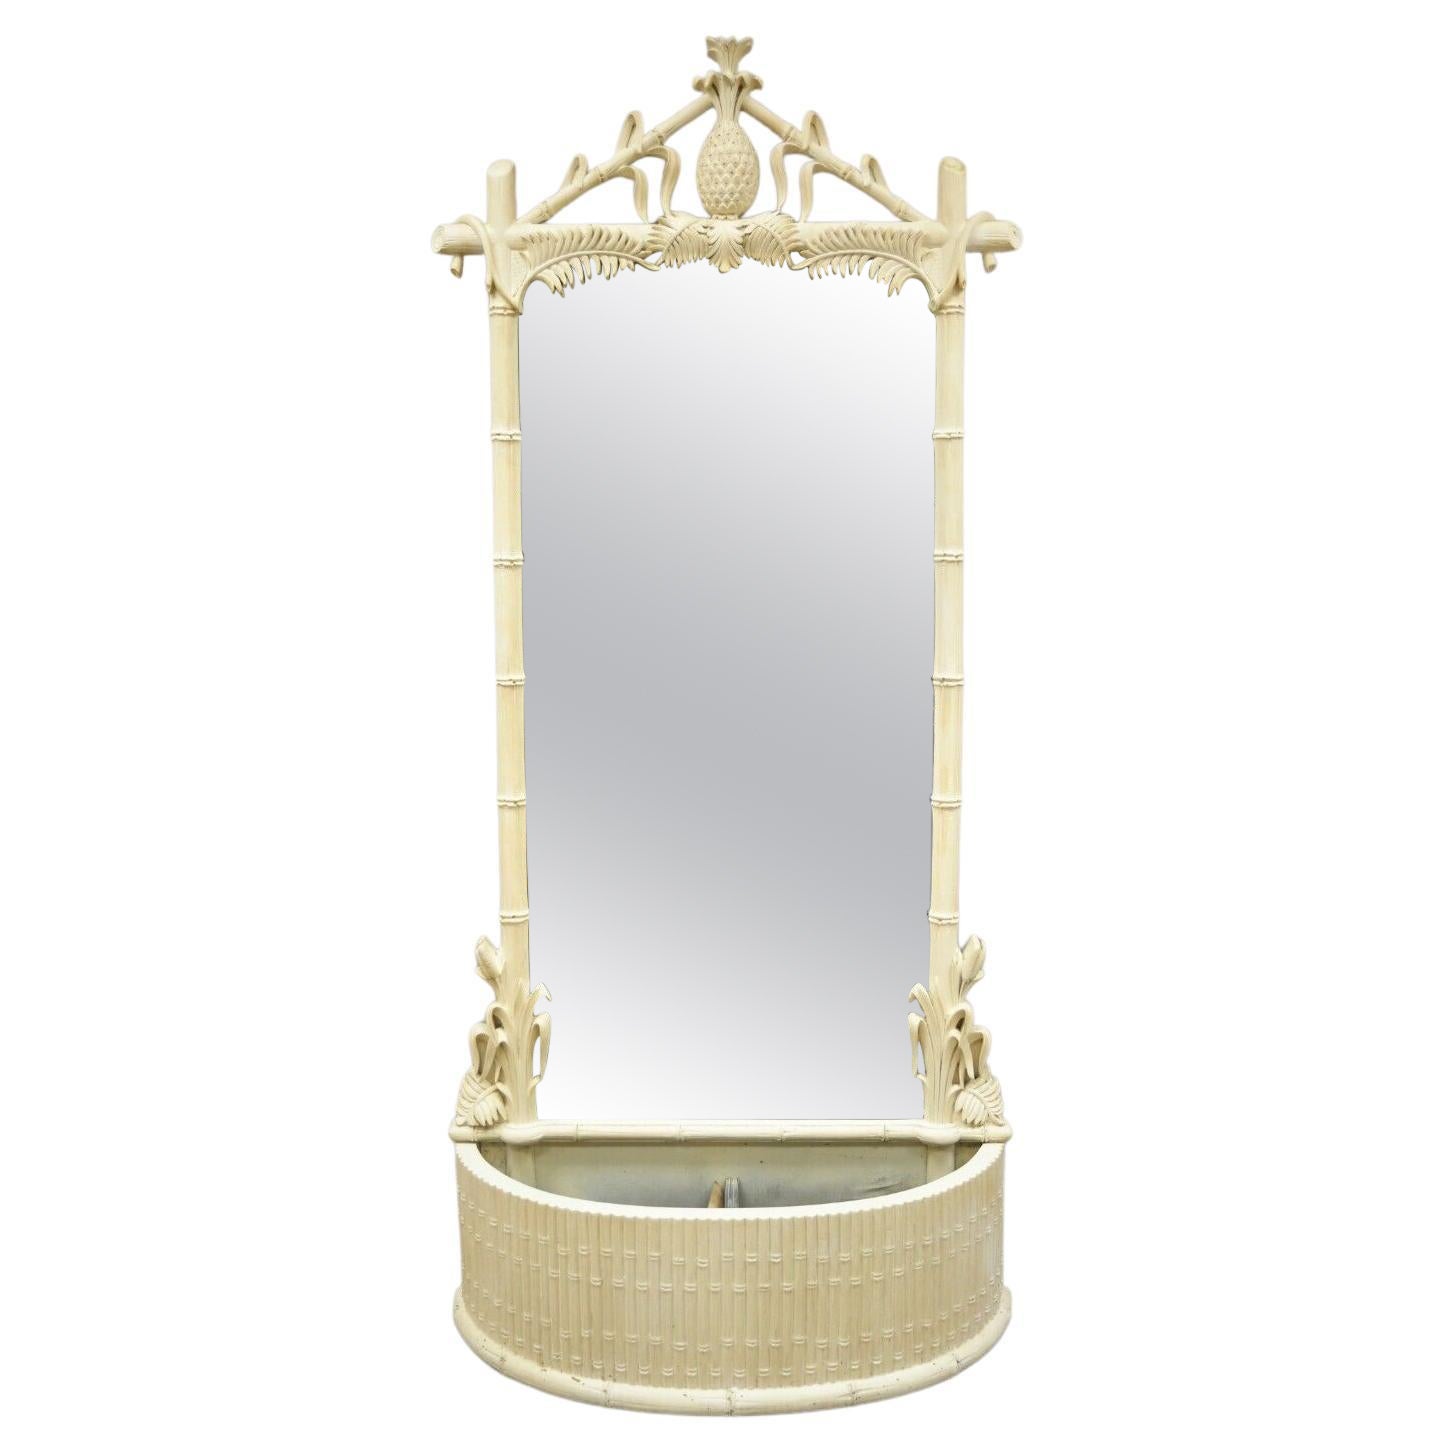 Gampel Stoll Hollywood Regency Pineapple Faux Bamboo Tall Large Hall Mirror